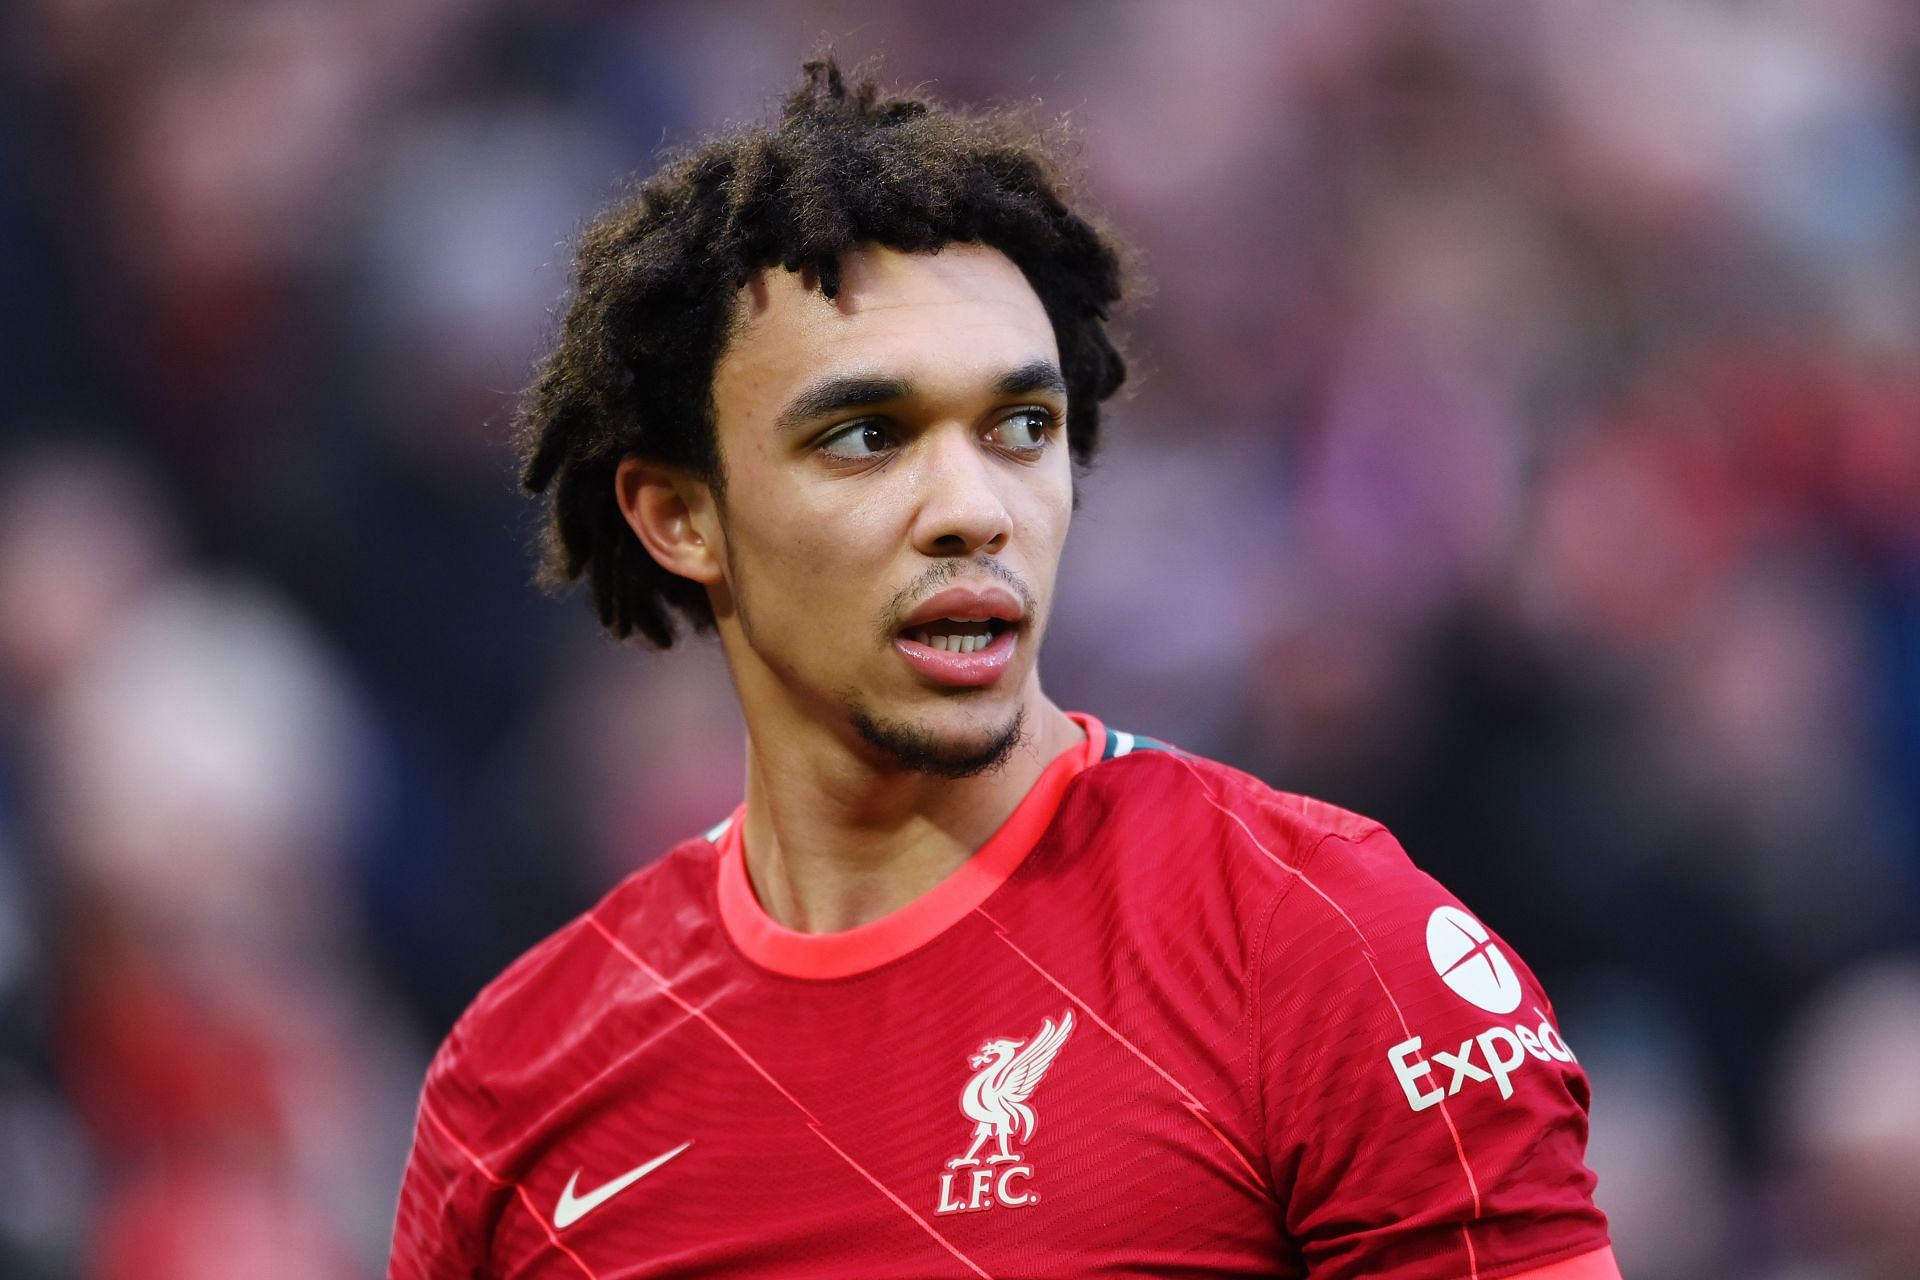 Liverpool defender Trent Alexander-Arnold will need to improvise against Inter Milan on Wednesday